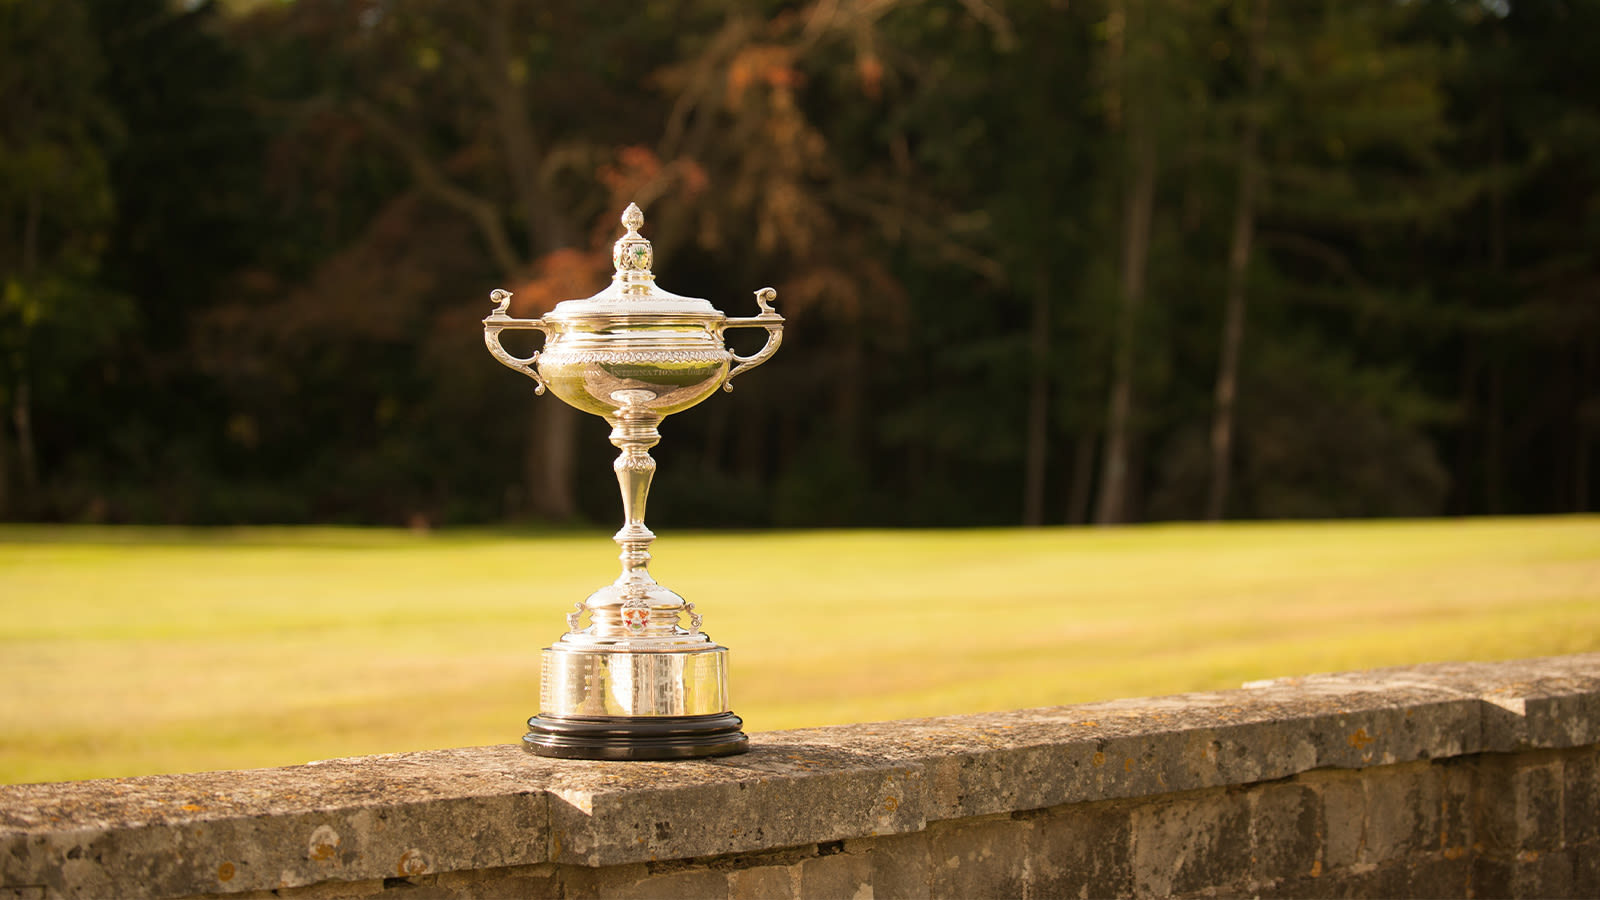 The United States team is going to England for the 30th PGA Cup